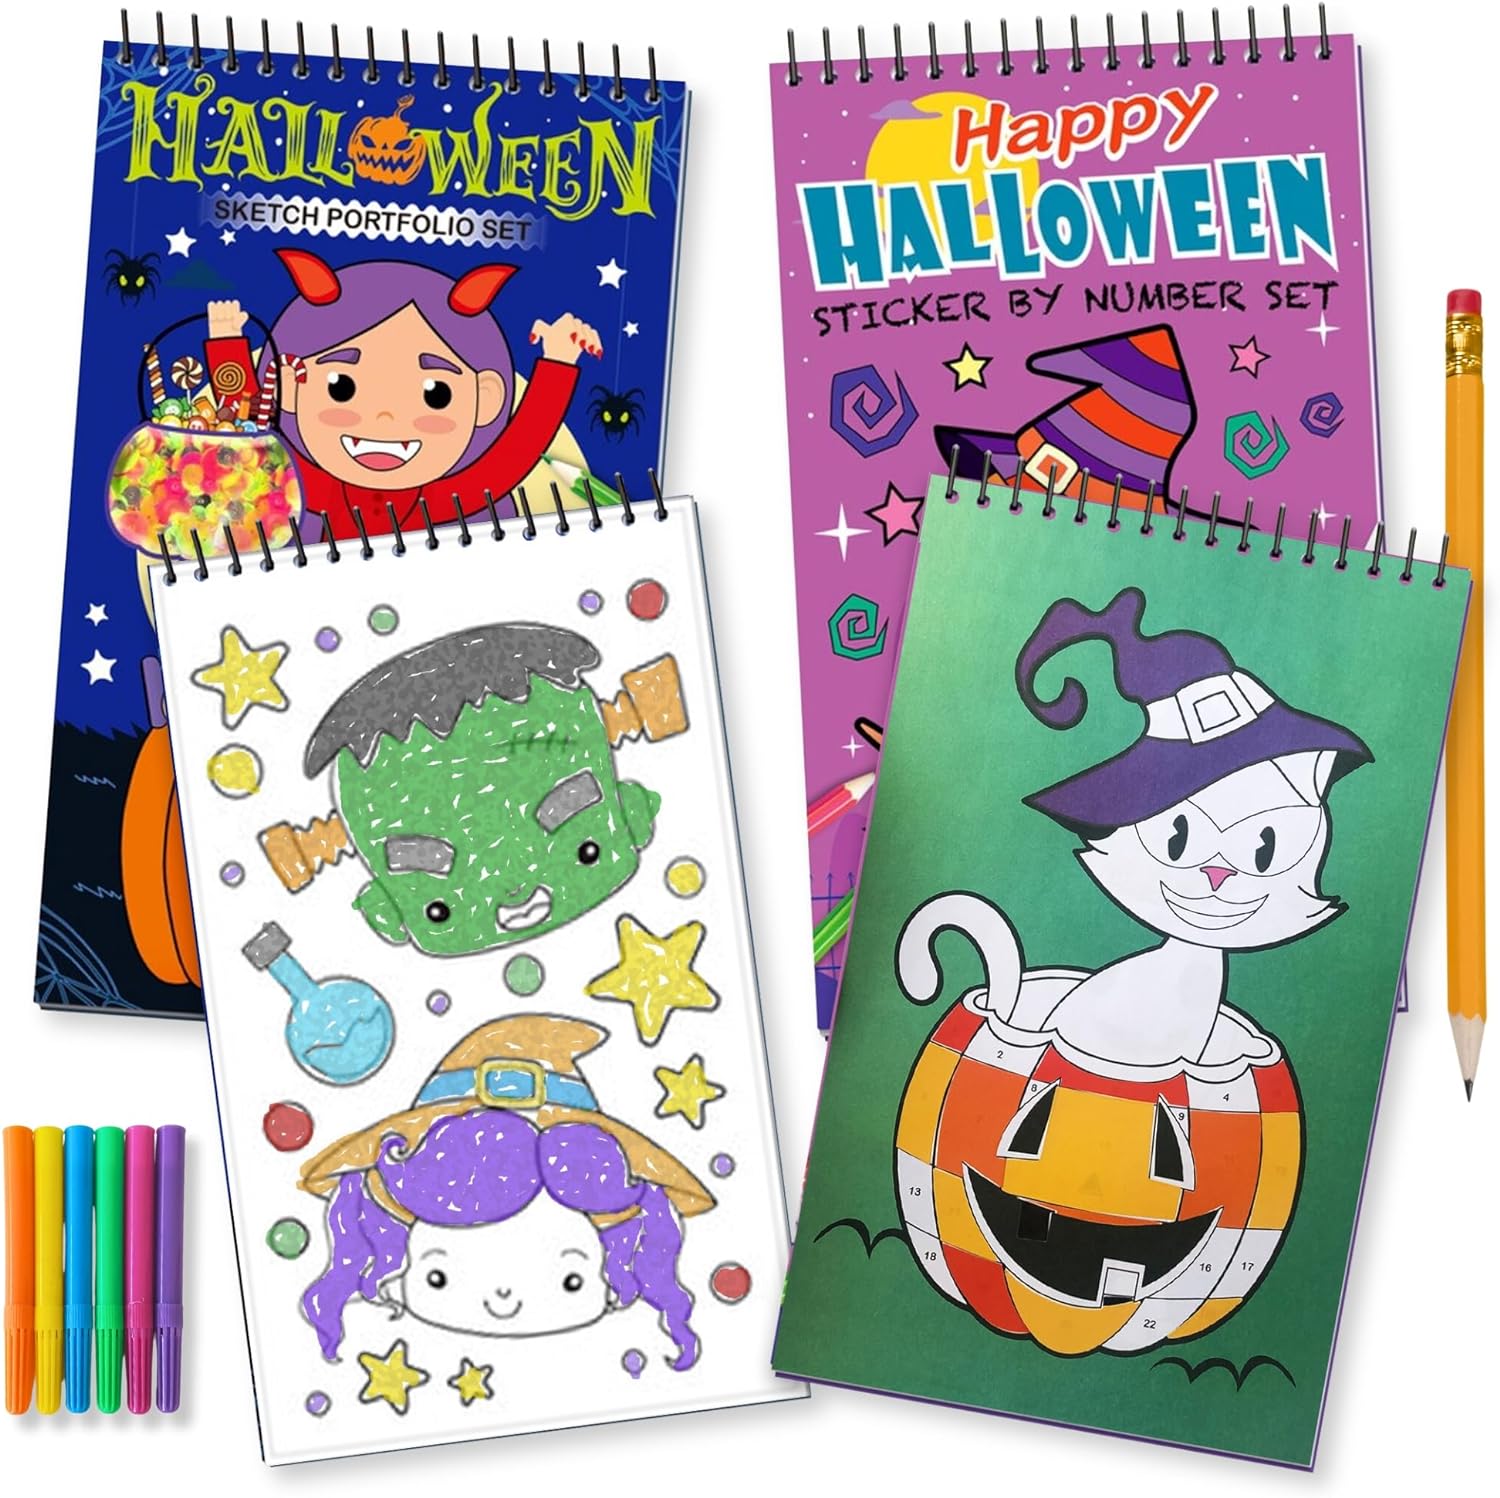 ArtCreativity Halloween Sticker Art Books, Sticker by Number Book with Halloween Sticker Art and Coloring Pages, and Coloring Book with Halloween Stickers, Stencil, and Markers, for Kids Ages 4-8